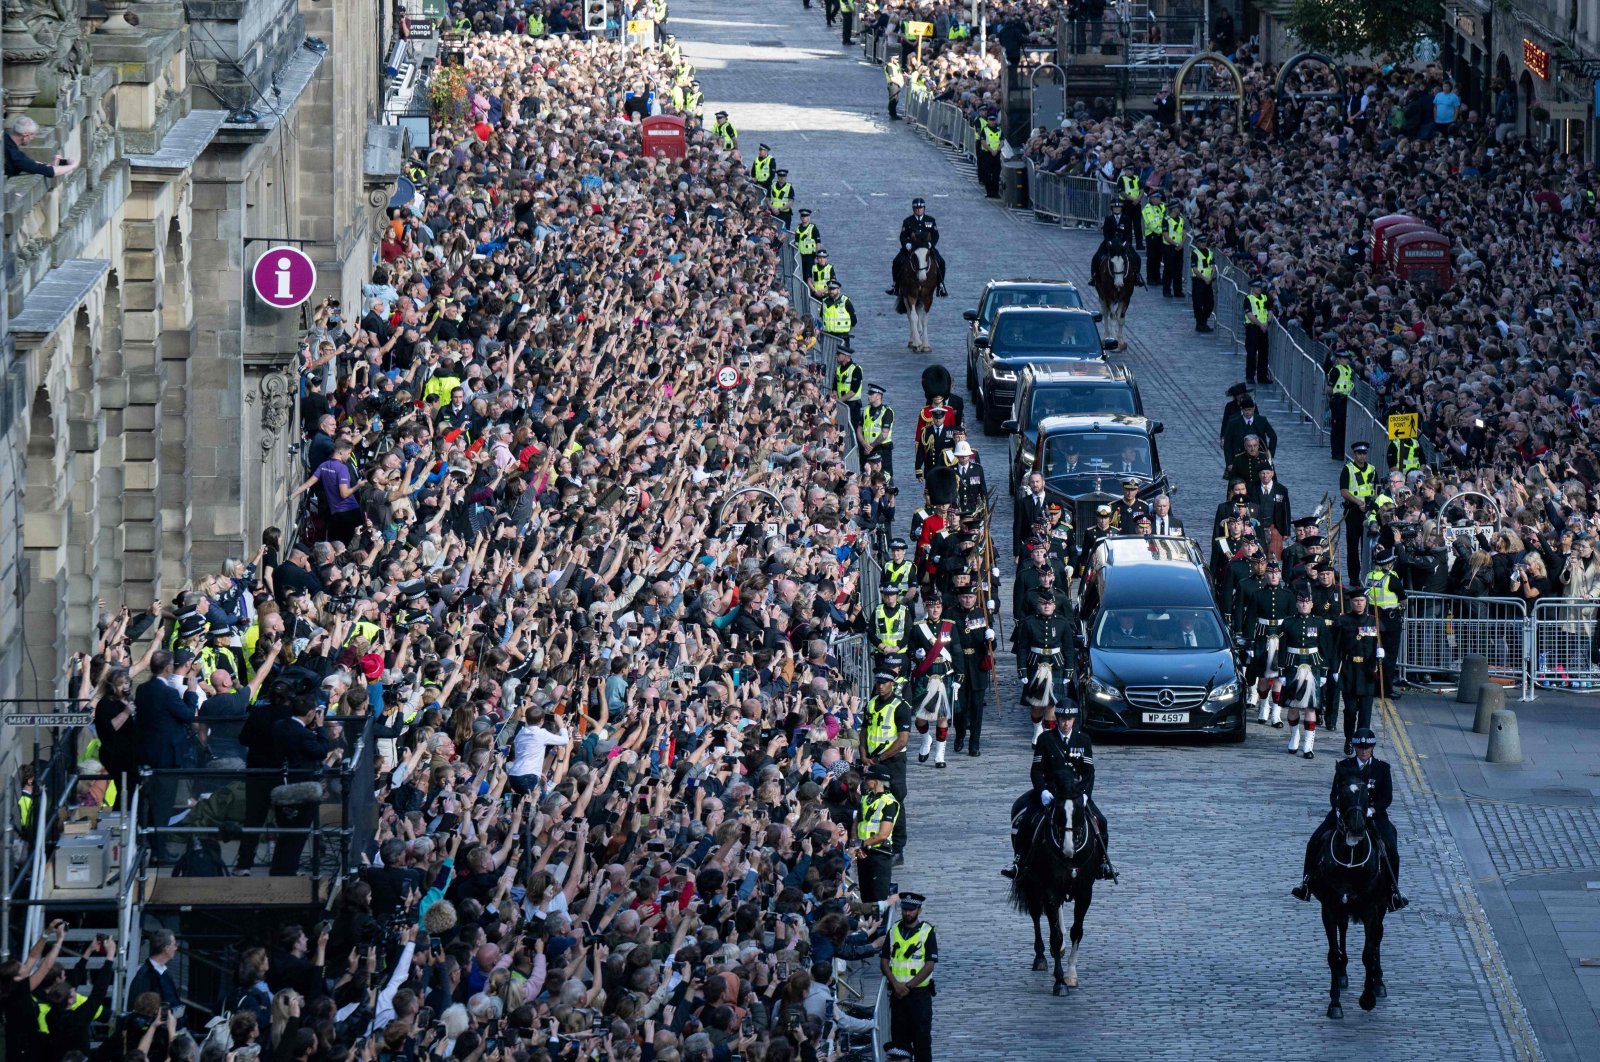 Members of the public watch the procession of the late Queen Elizabeth II&#039;s coffin, from the Palace of Holyroodhouse to St. Giles Cathedral in Edinburgh, on the Royal Mile, where Queen Elizabeth II will lie at rest, Sept. 12, 2022. (AFP Photo)